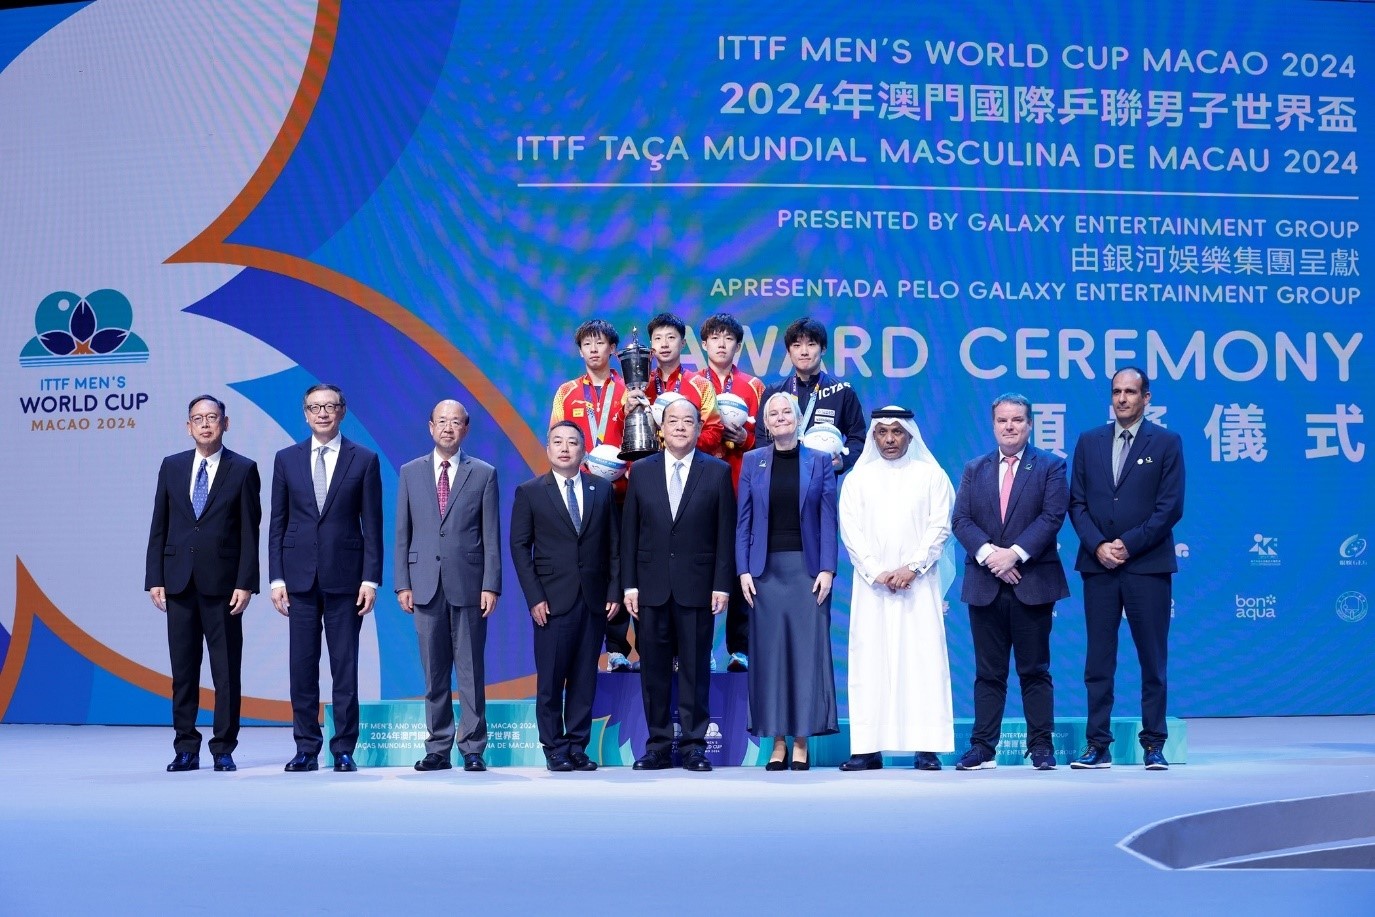 The officiating guests presented the awards to and took a photo with the ITTF Men’s World Cup champion, silver medalist and bronze medalist.